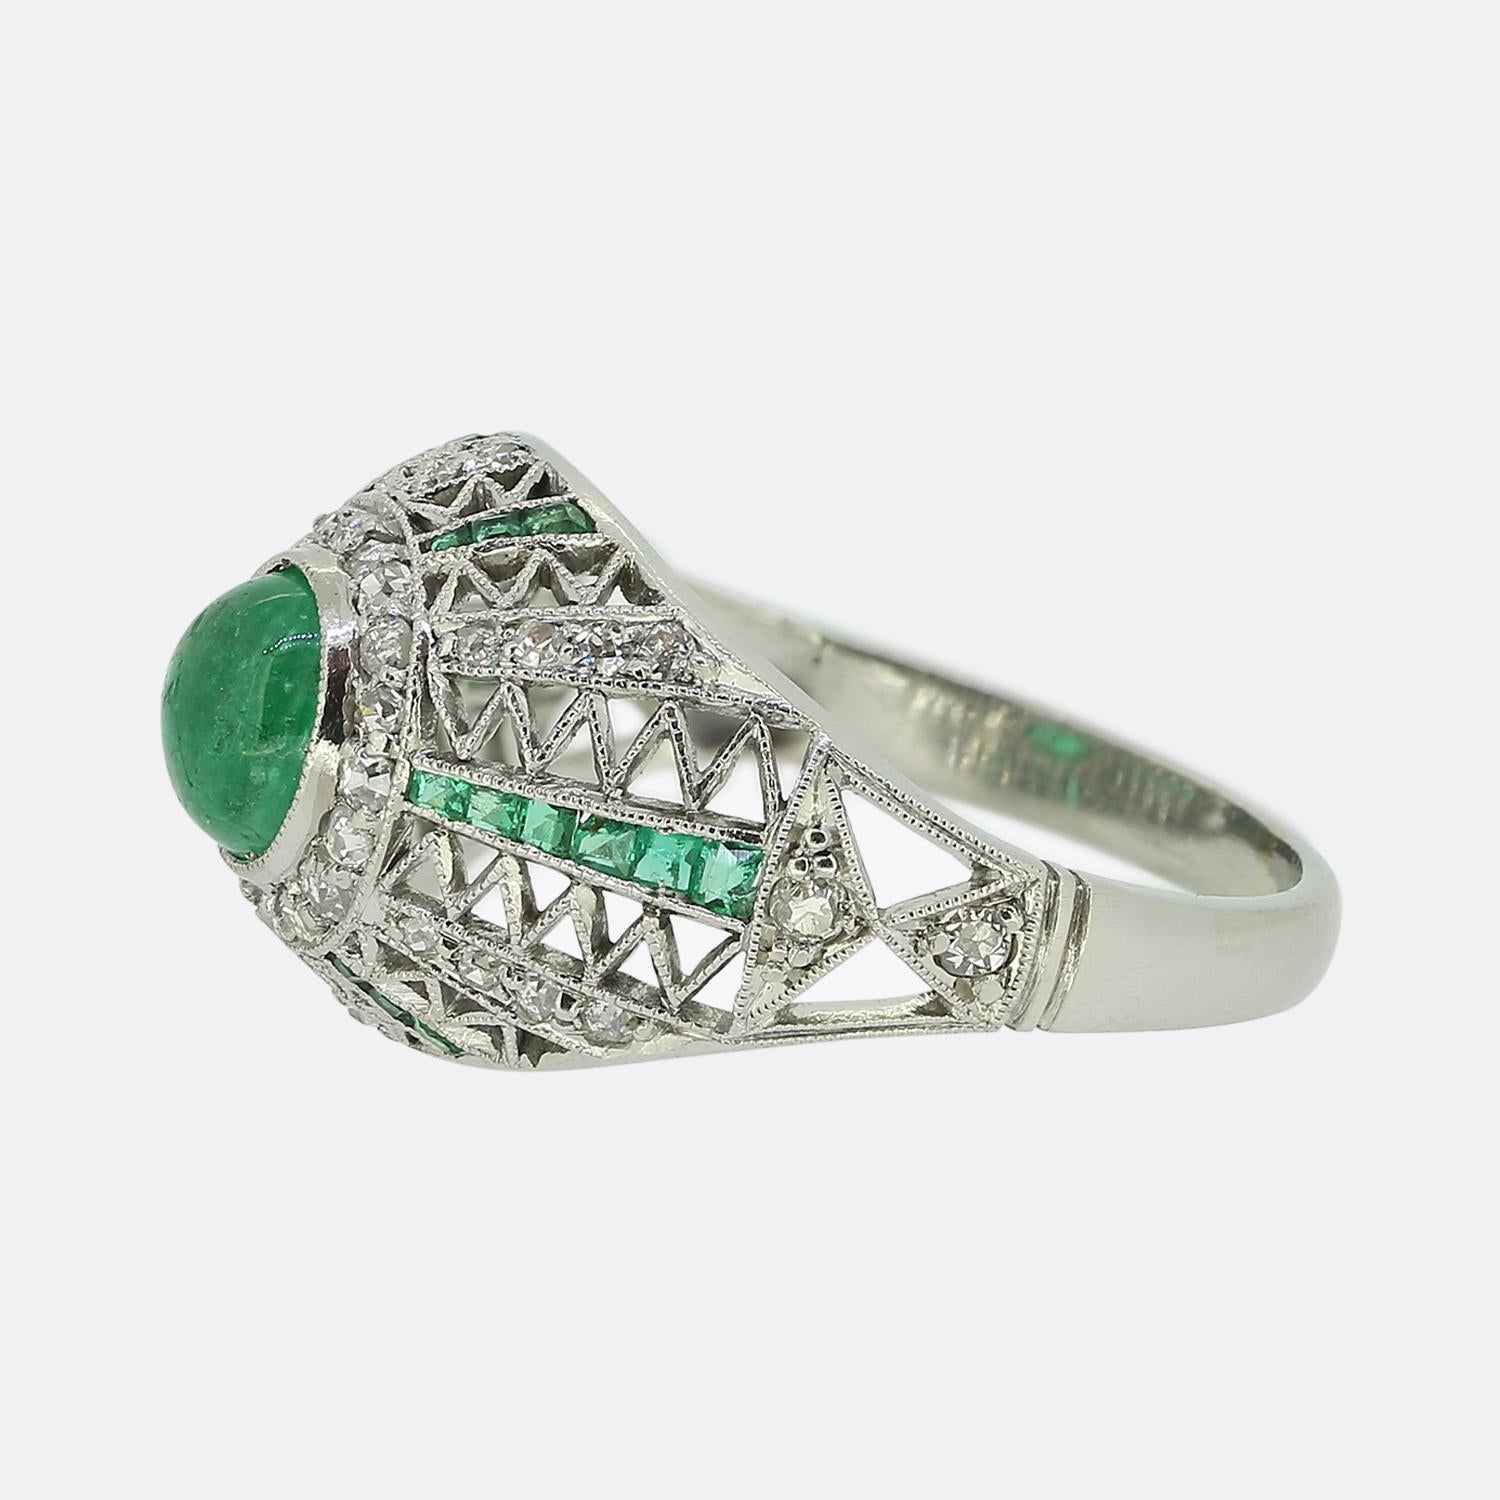 Here we have a fabulous emerald and diamond bombe ring crafted at a time when the Art Deco style was at the height of design. An open concave face has been crafted from platinum and showcases fine zig-zag filigree work. Detailed milgrain settings